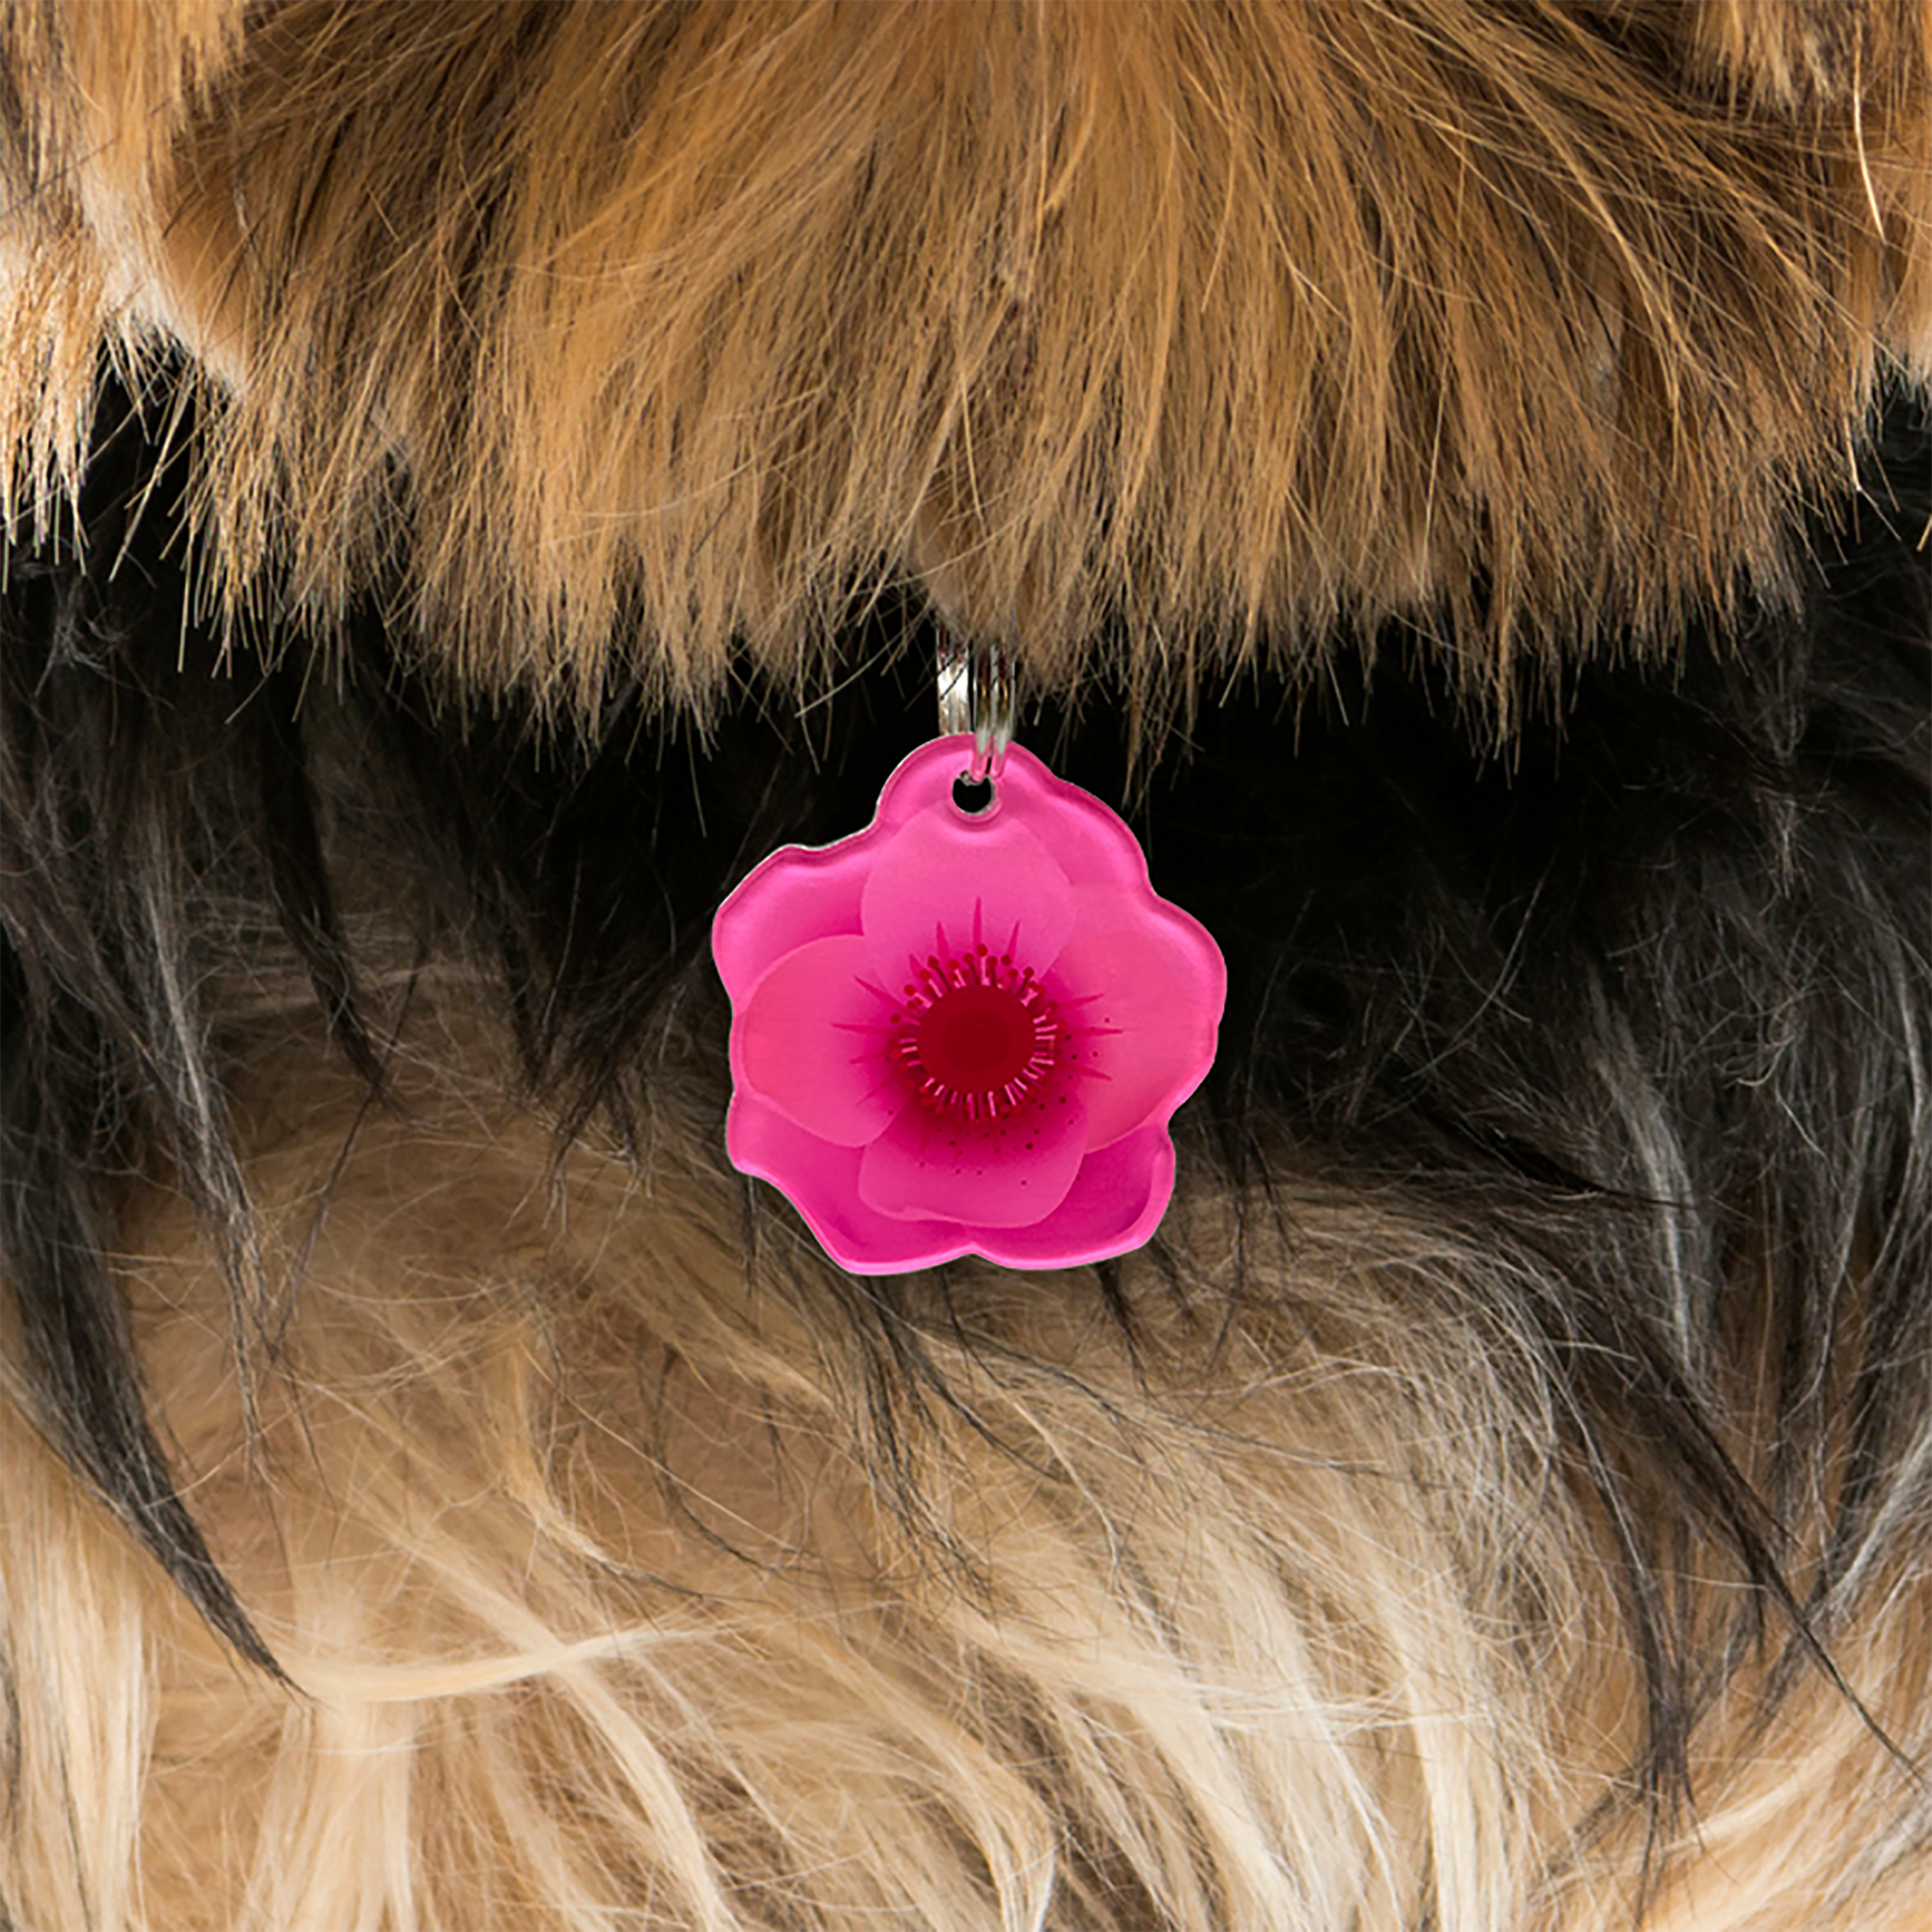 Ruber Hibiscus - 2x Tags Dog Name Tags by Bashtags